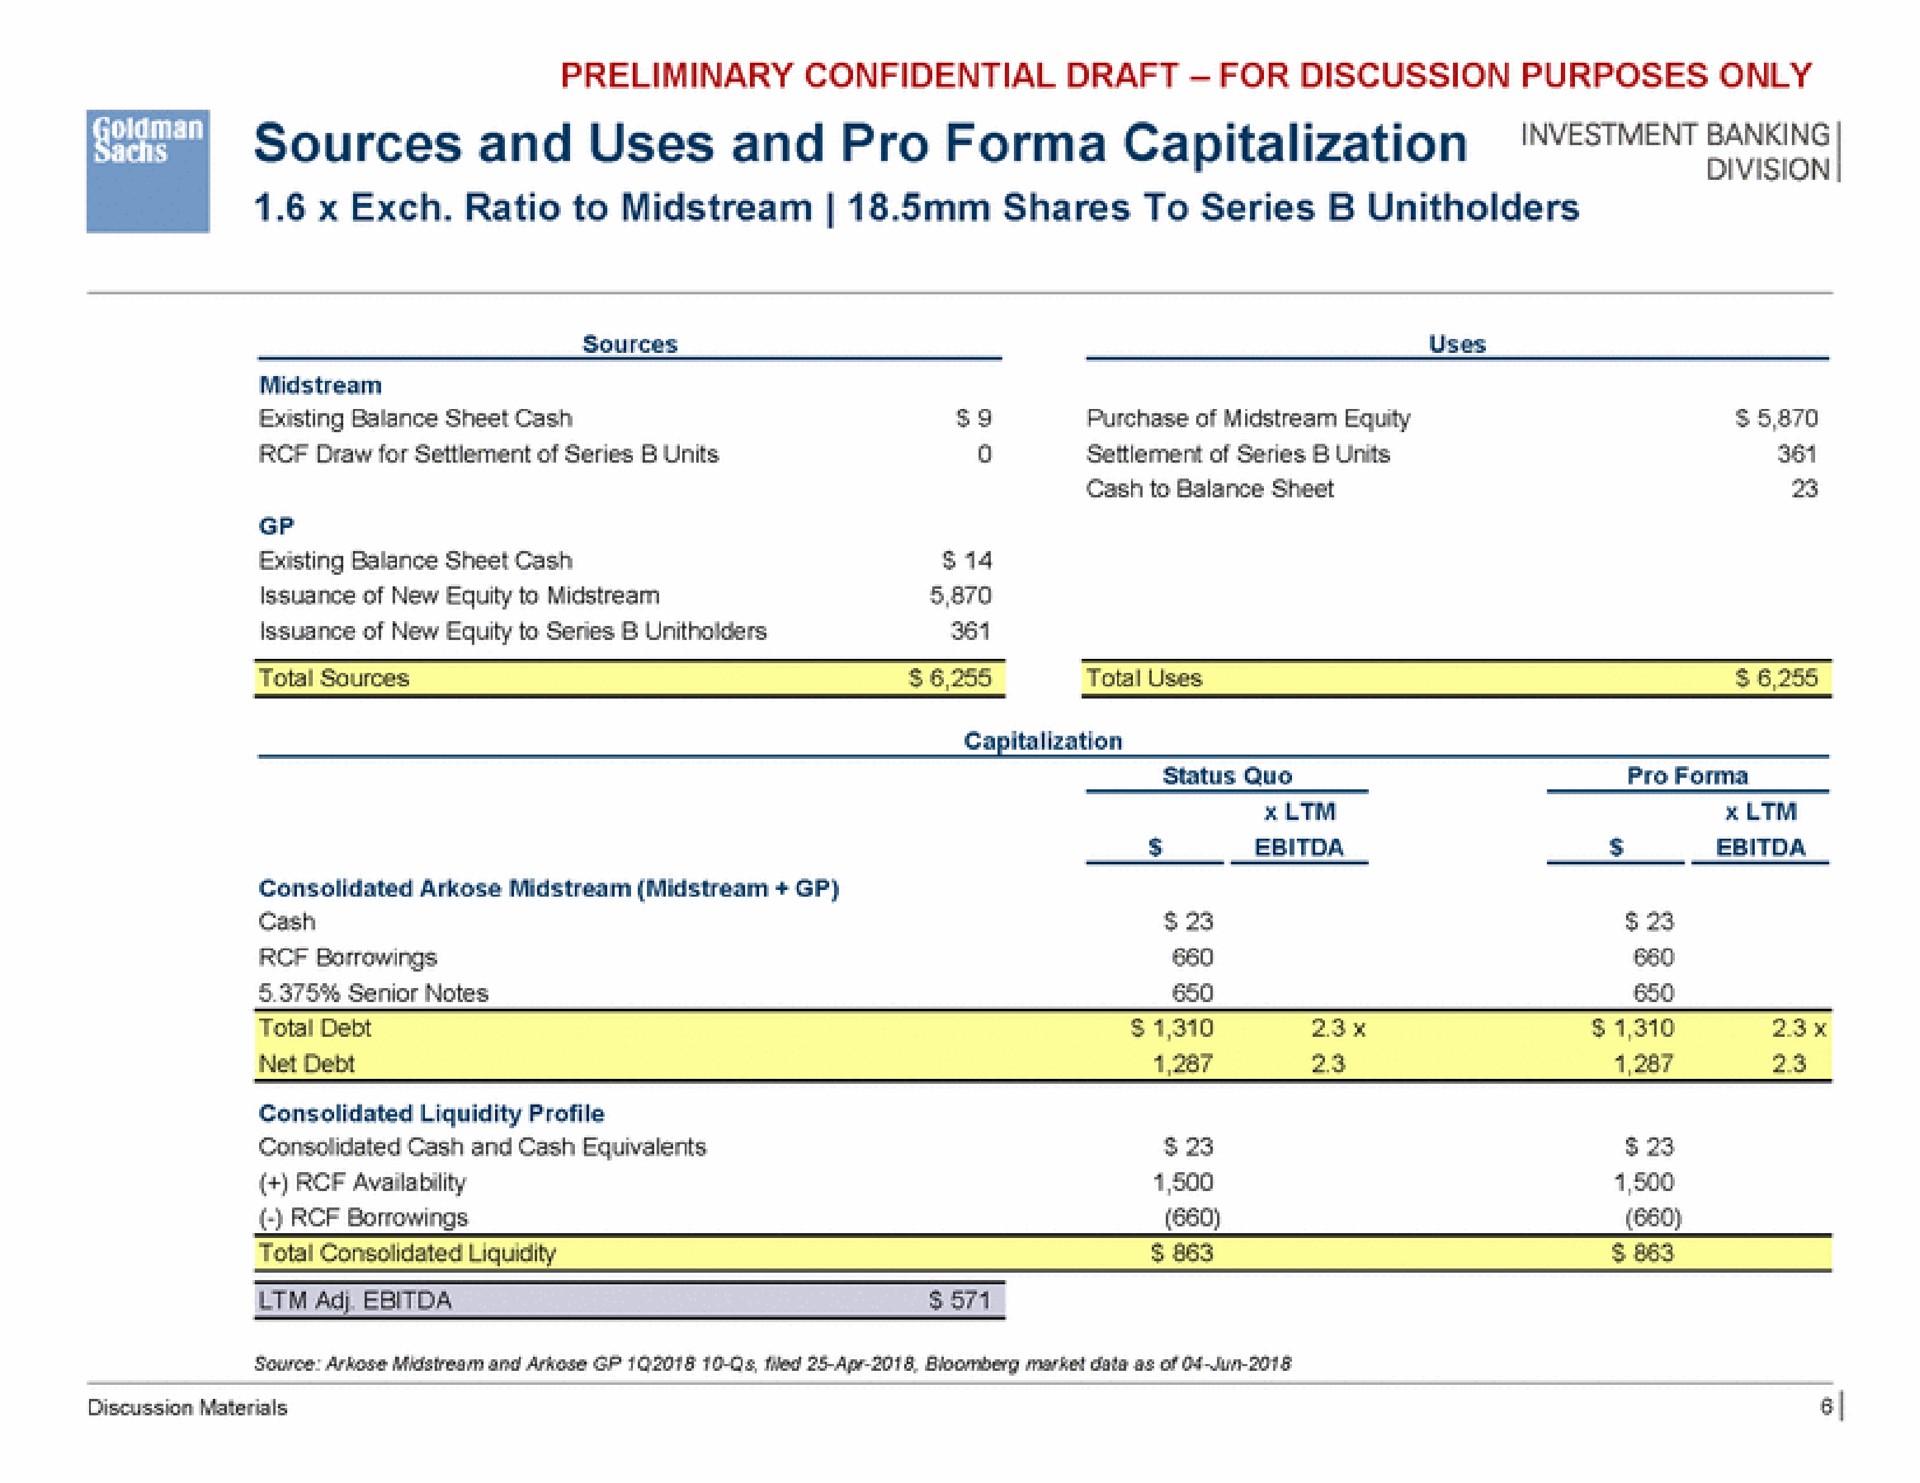 sources and uses and pro capitalization | Goldman Sachs